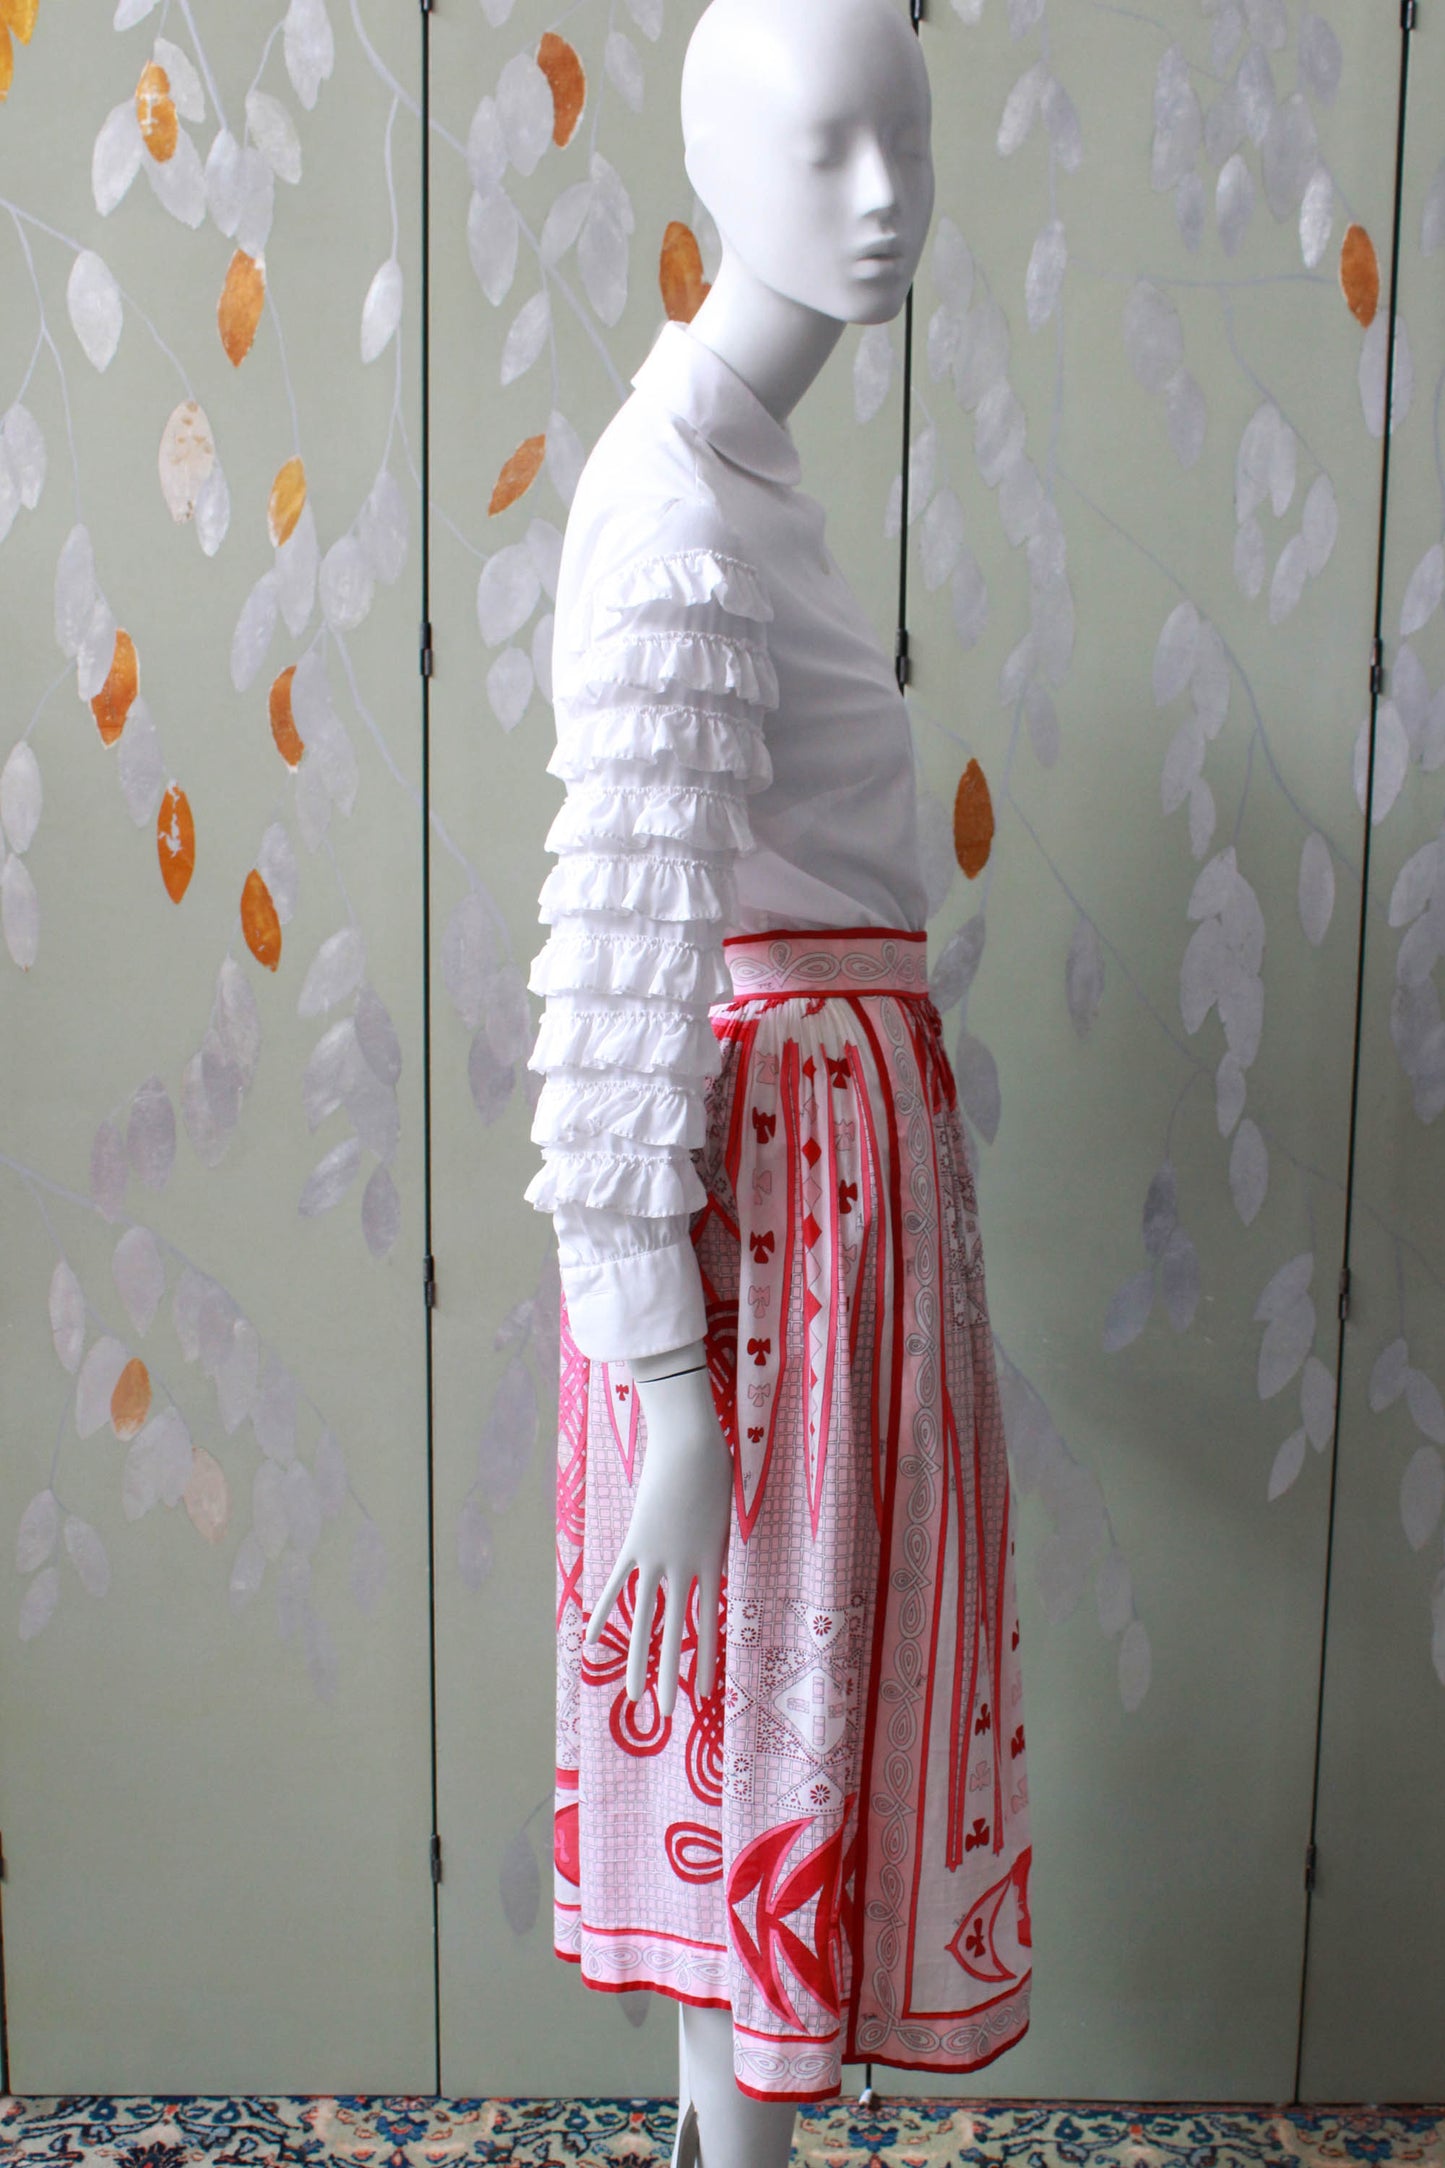 1960s Emilio Pucci Pink Printed Cotton Skirt, Small